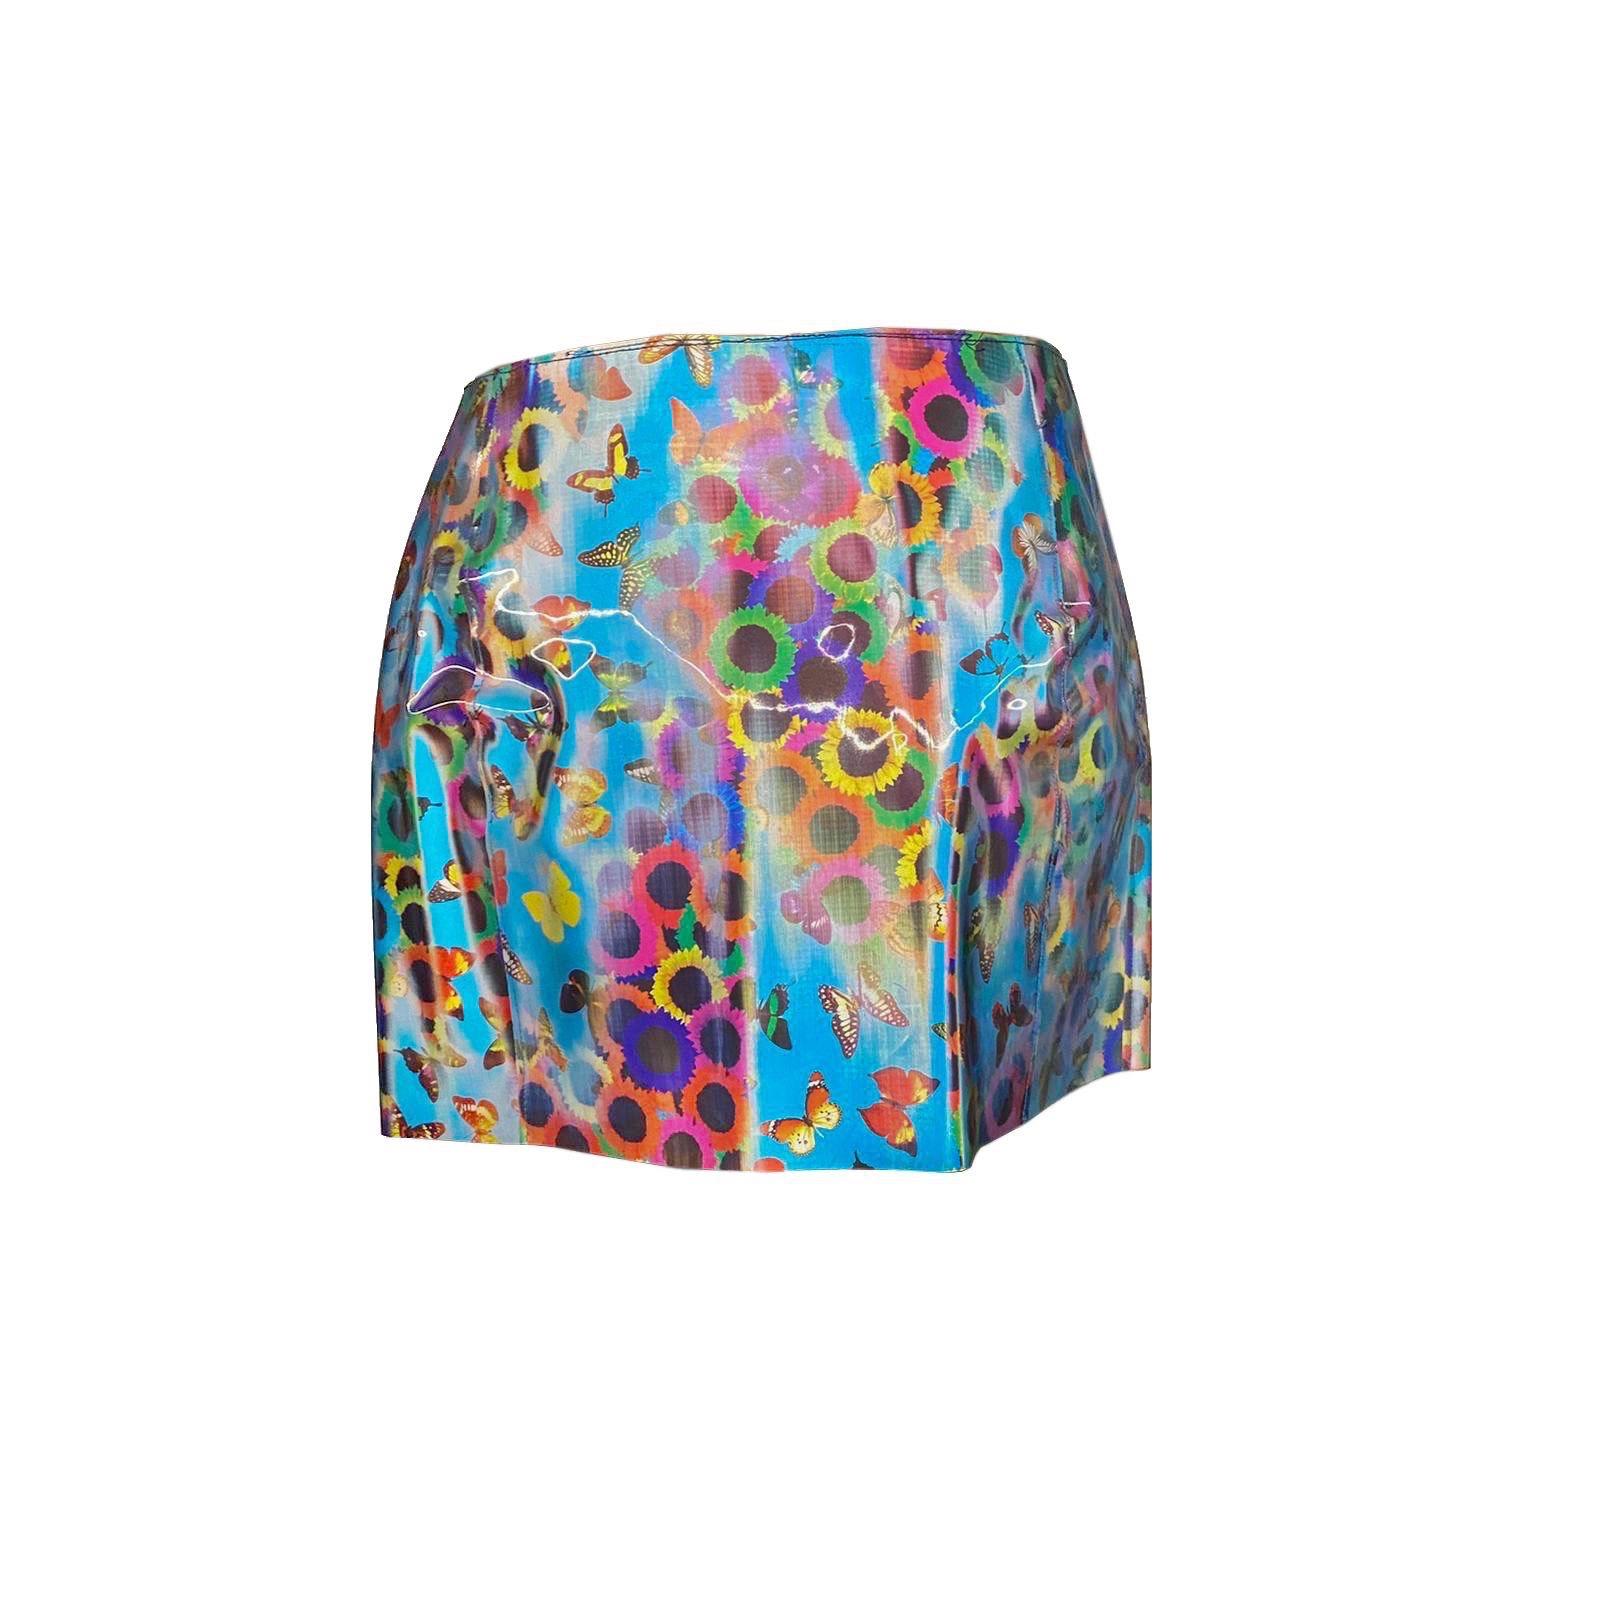 Dolce & Gabbana Blue PVC Mini Skirt with “3-D Effect” Floral/Butterfly Print from the Fall/Winter 1999 collection (the print changes accordingly to the movement).

Size IT 42
Waistline: 79 cm/ 31 inch
Height: 35.5 cm/ 13,9 inch
Total opening: 100